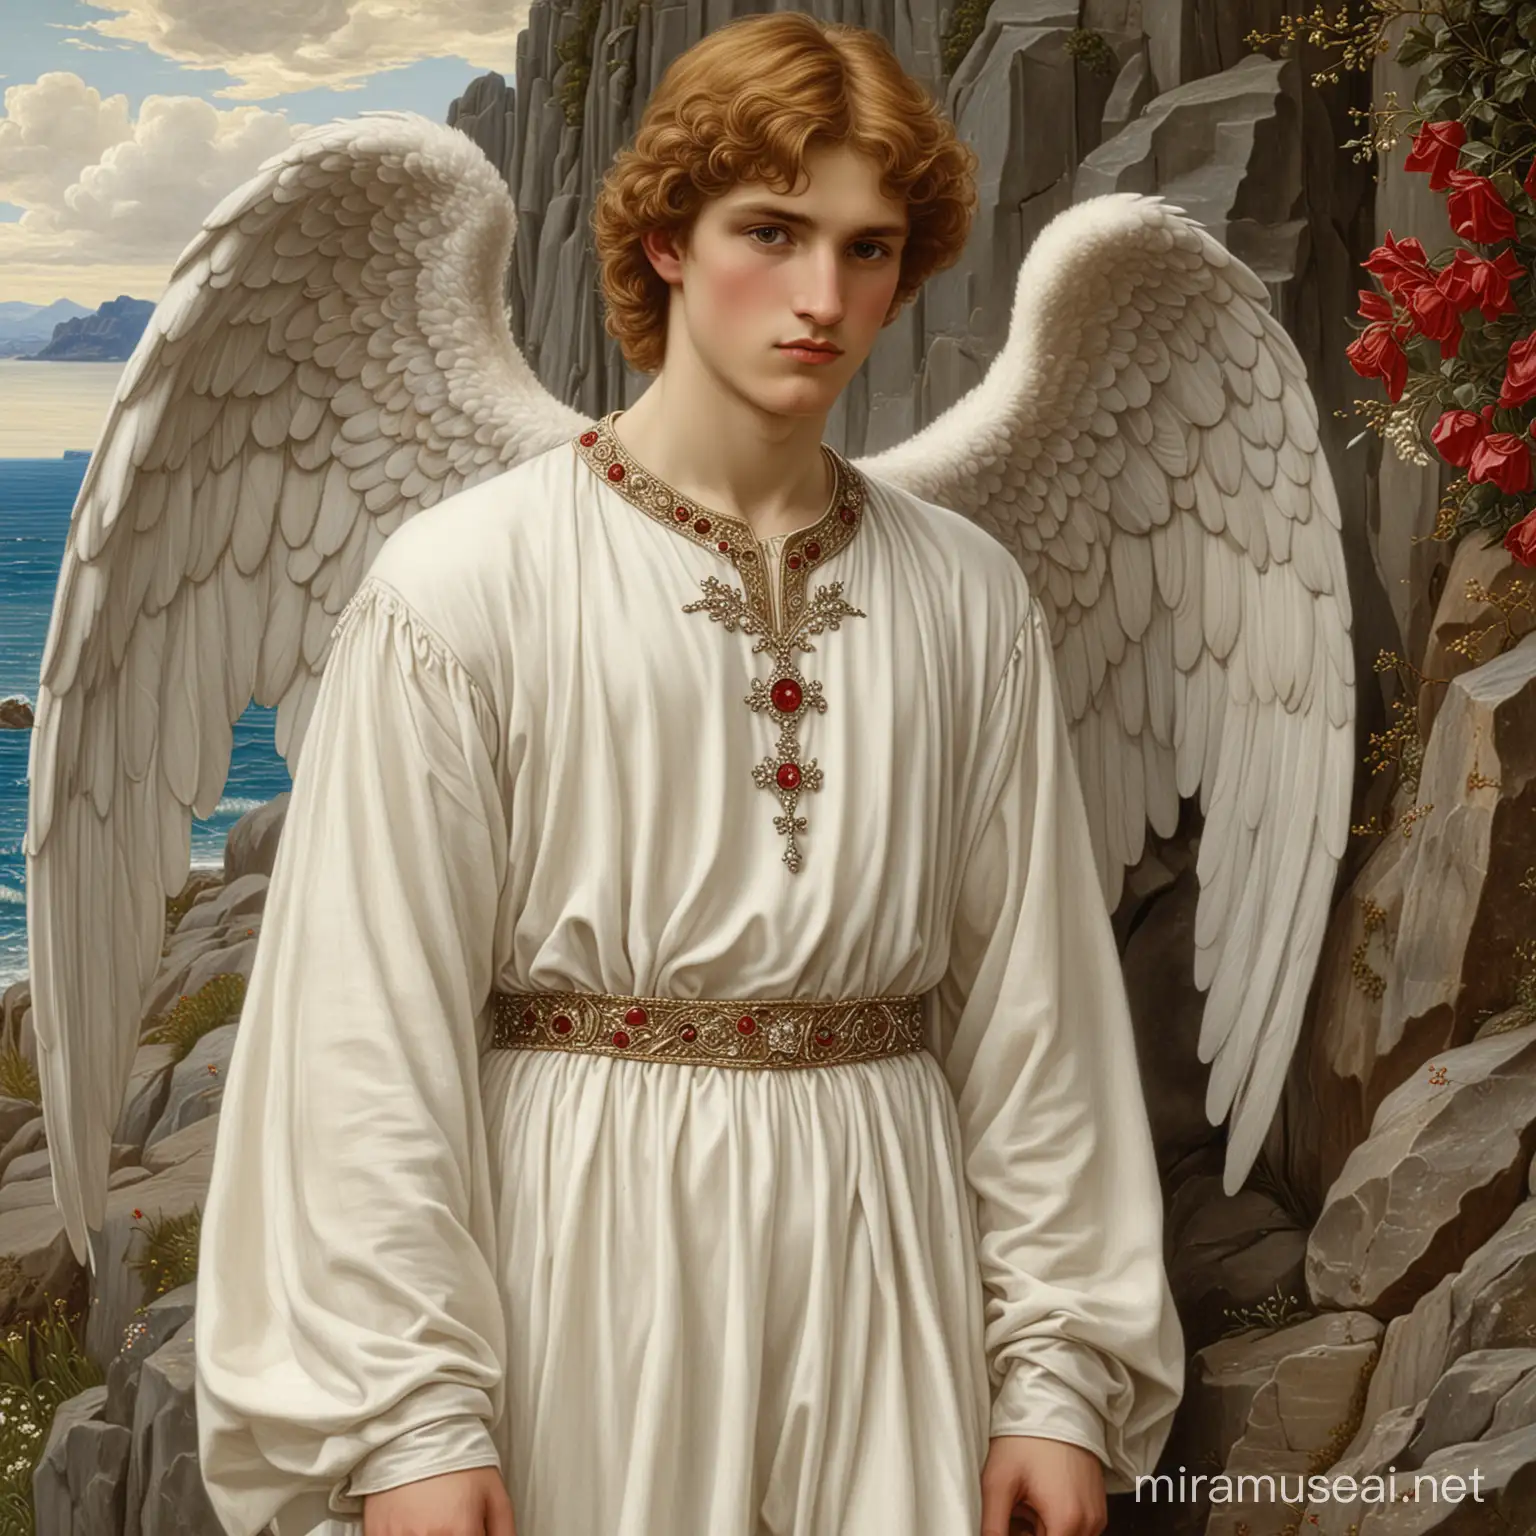 Ethereal 17YearOld Male Angel in Resplendent Attire on Rocky Perch